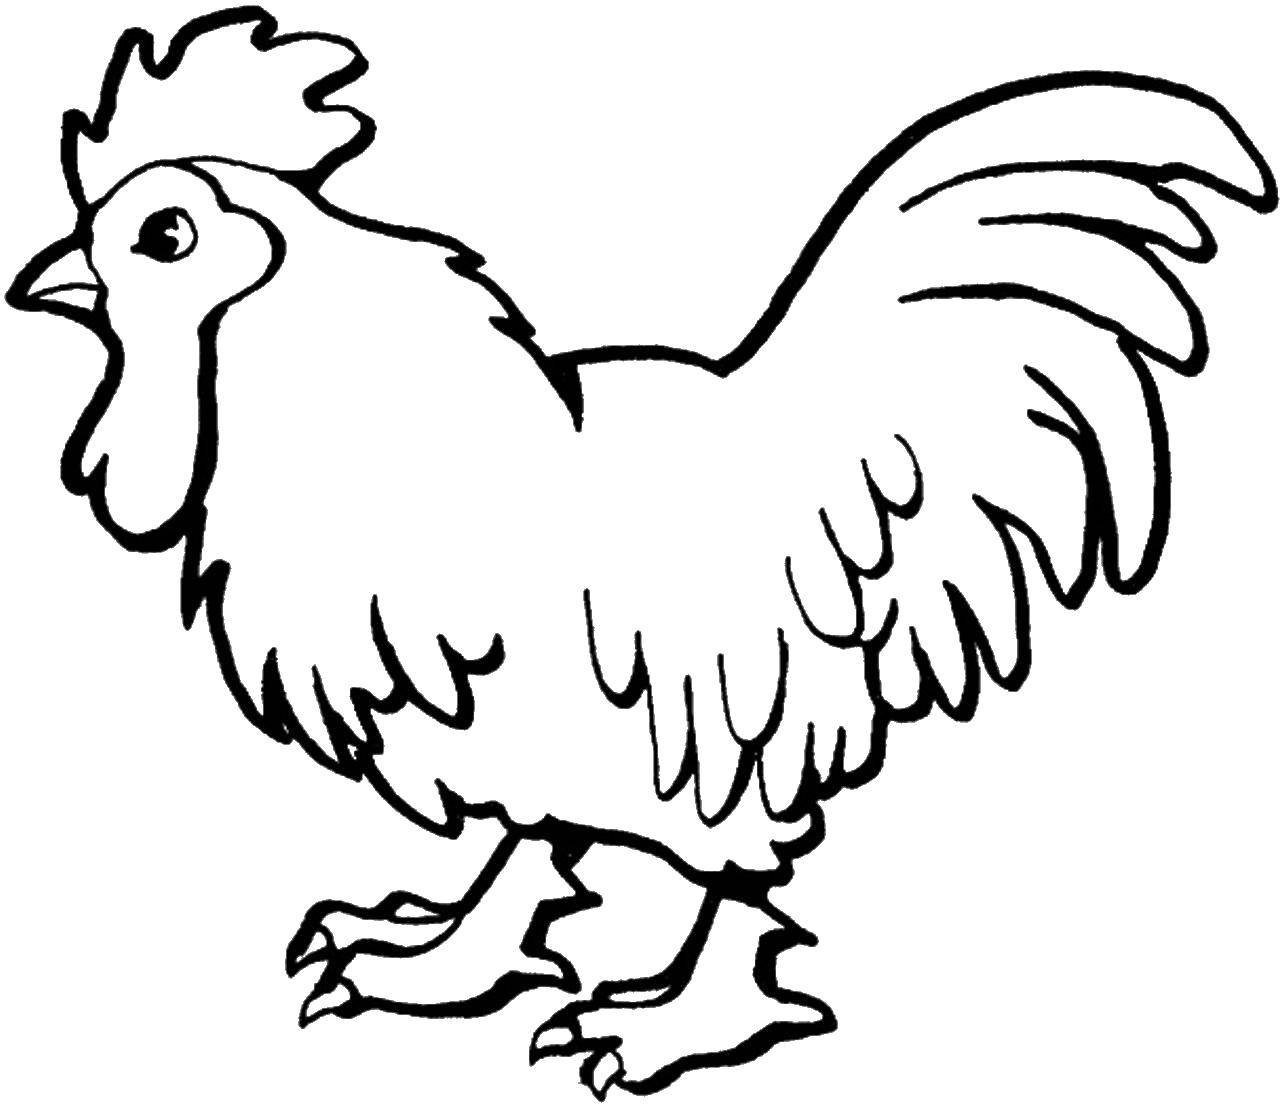 Coloring Terrible cock. Category Pets allowed. Tags:  Birds, cock.